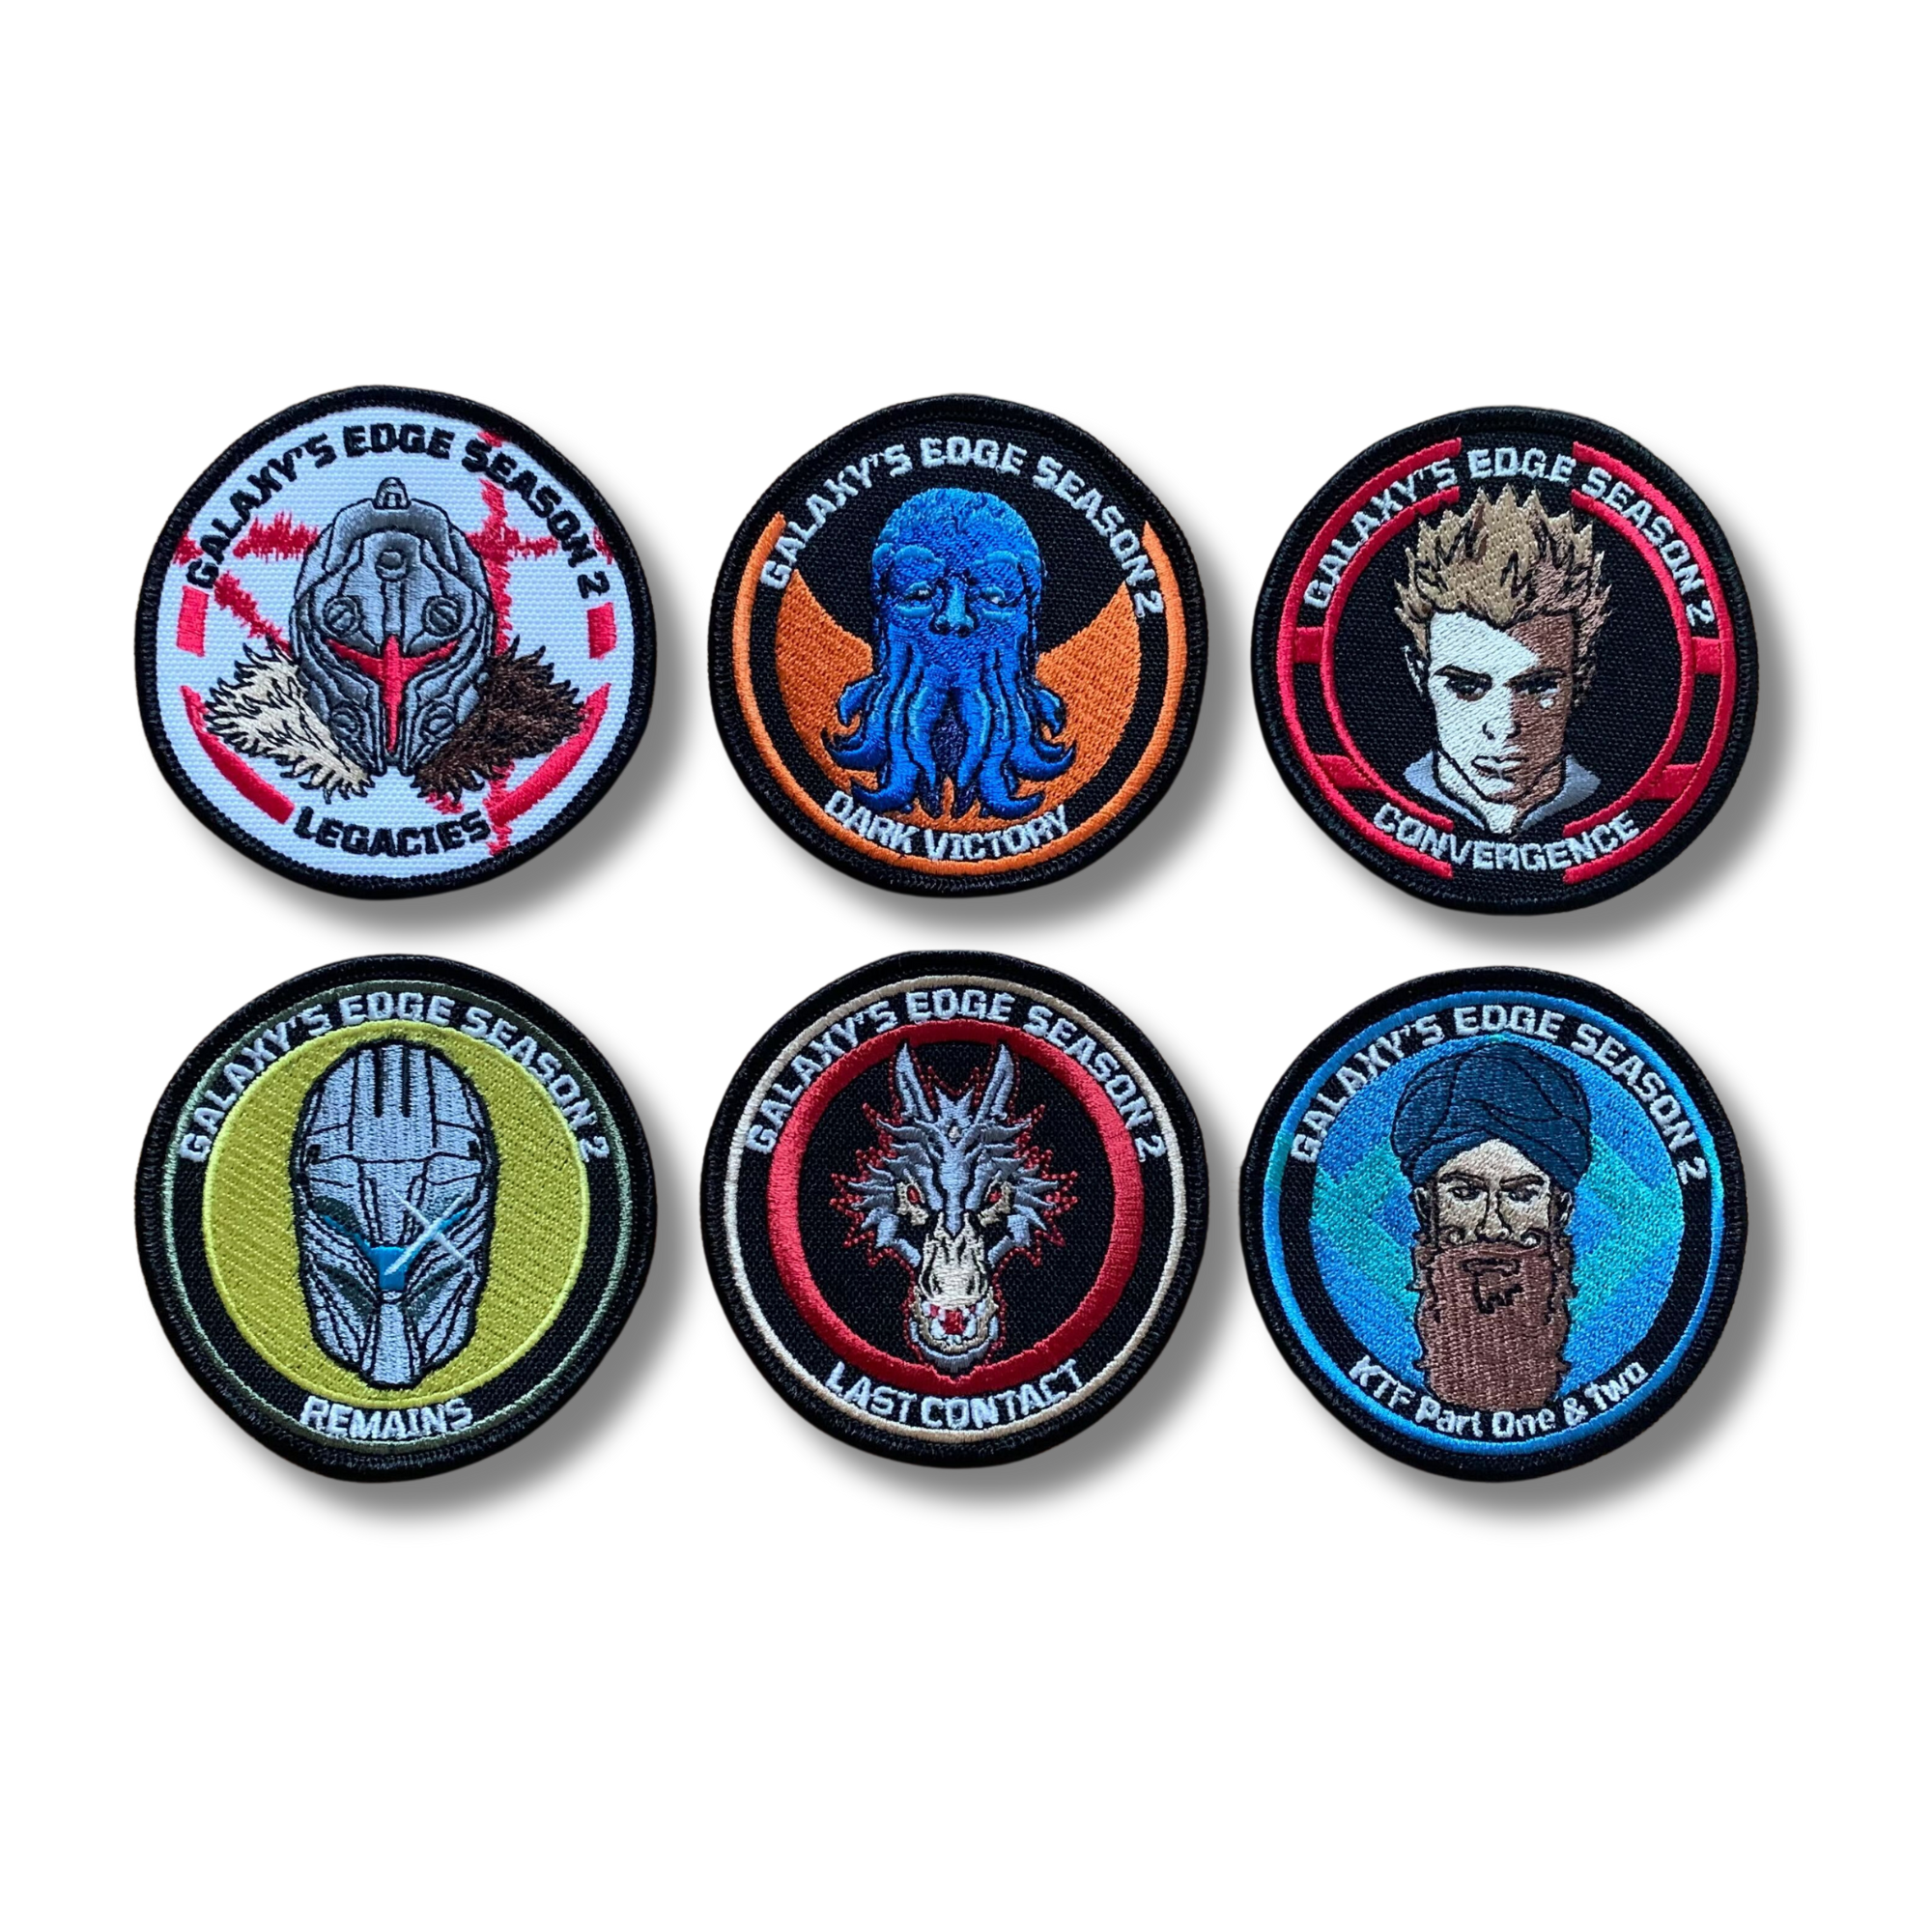 KTF™ Patch (Assorted Colors) – GALAXYS EDGE